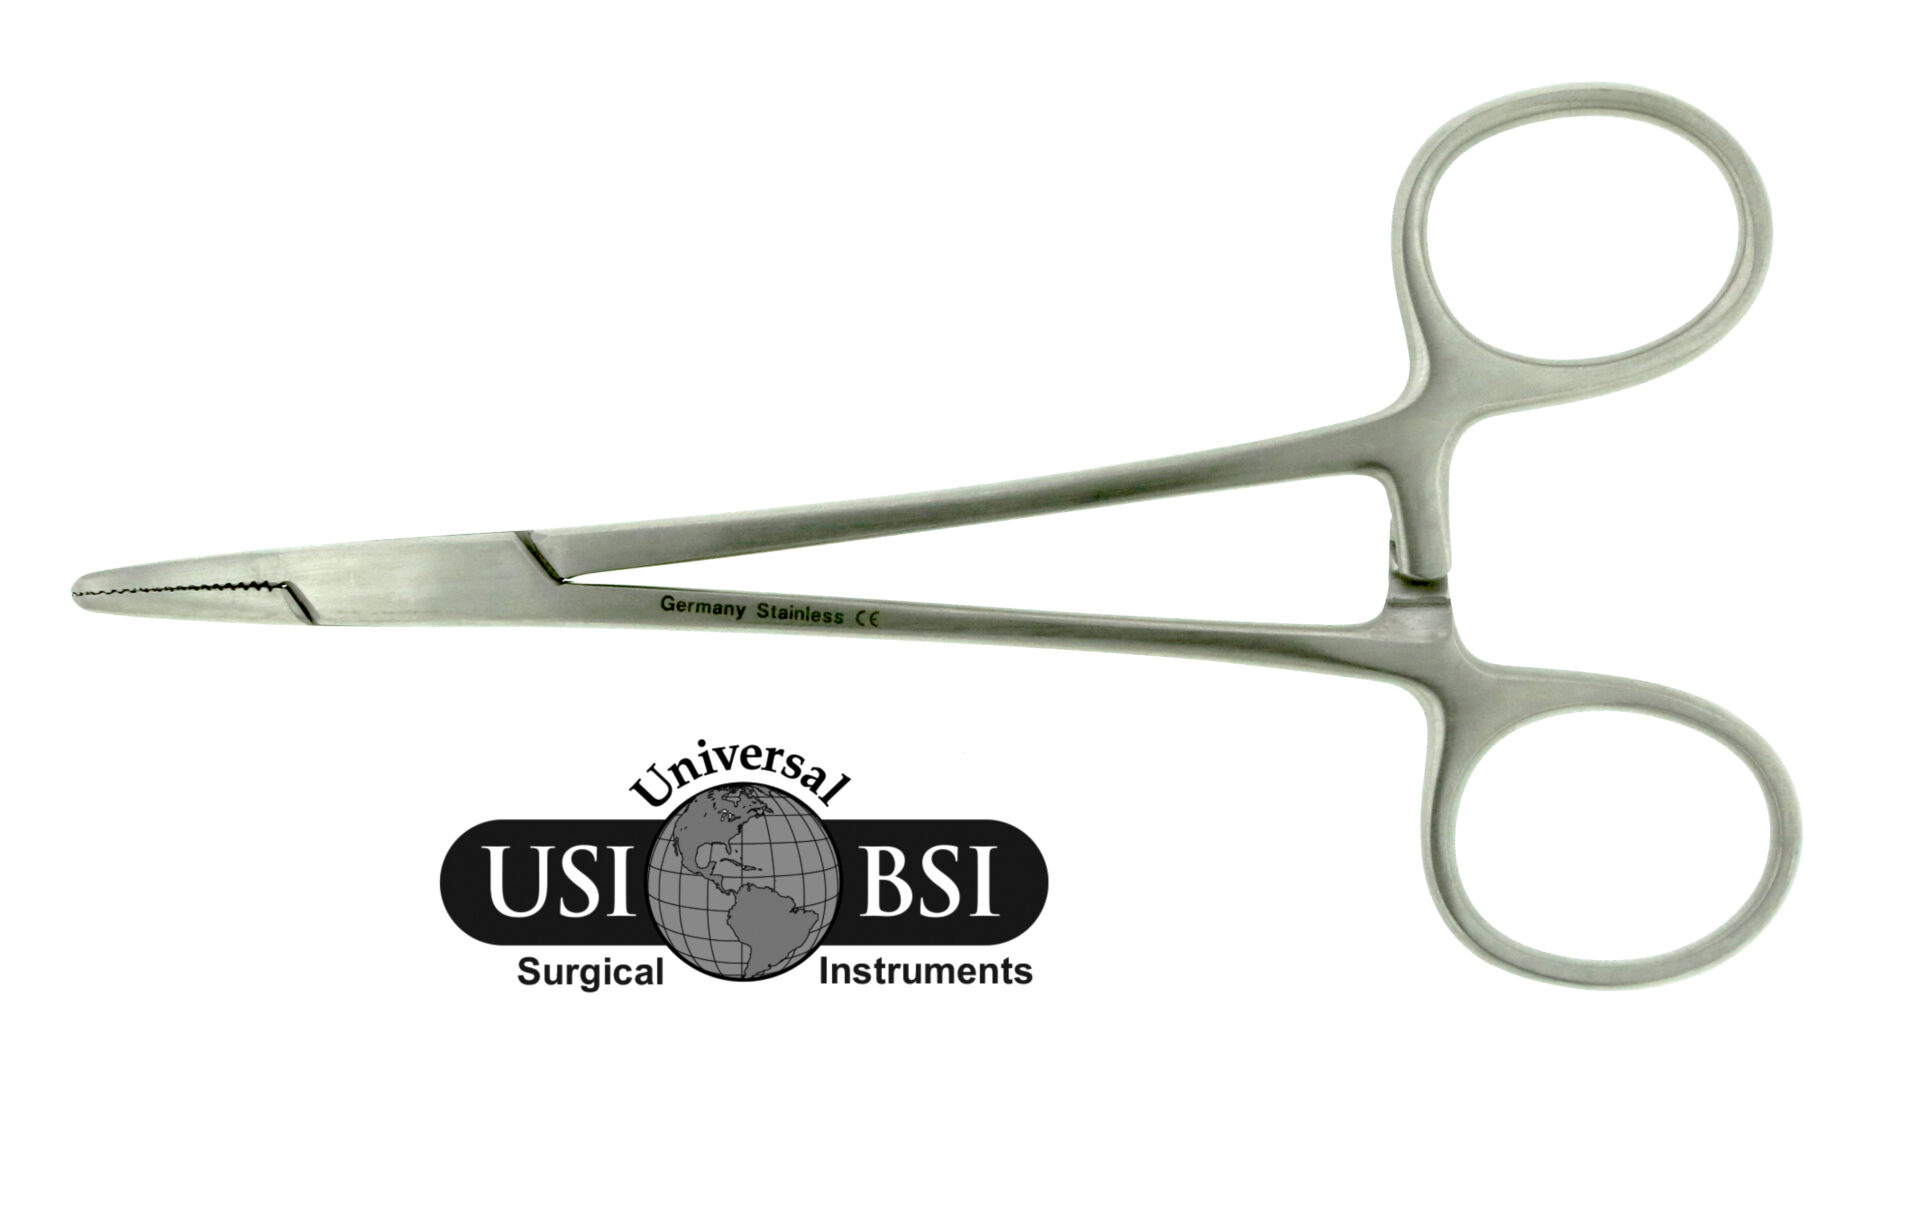 A pair of scissors with the us bsi logo on it.